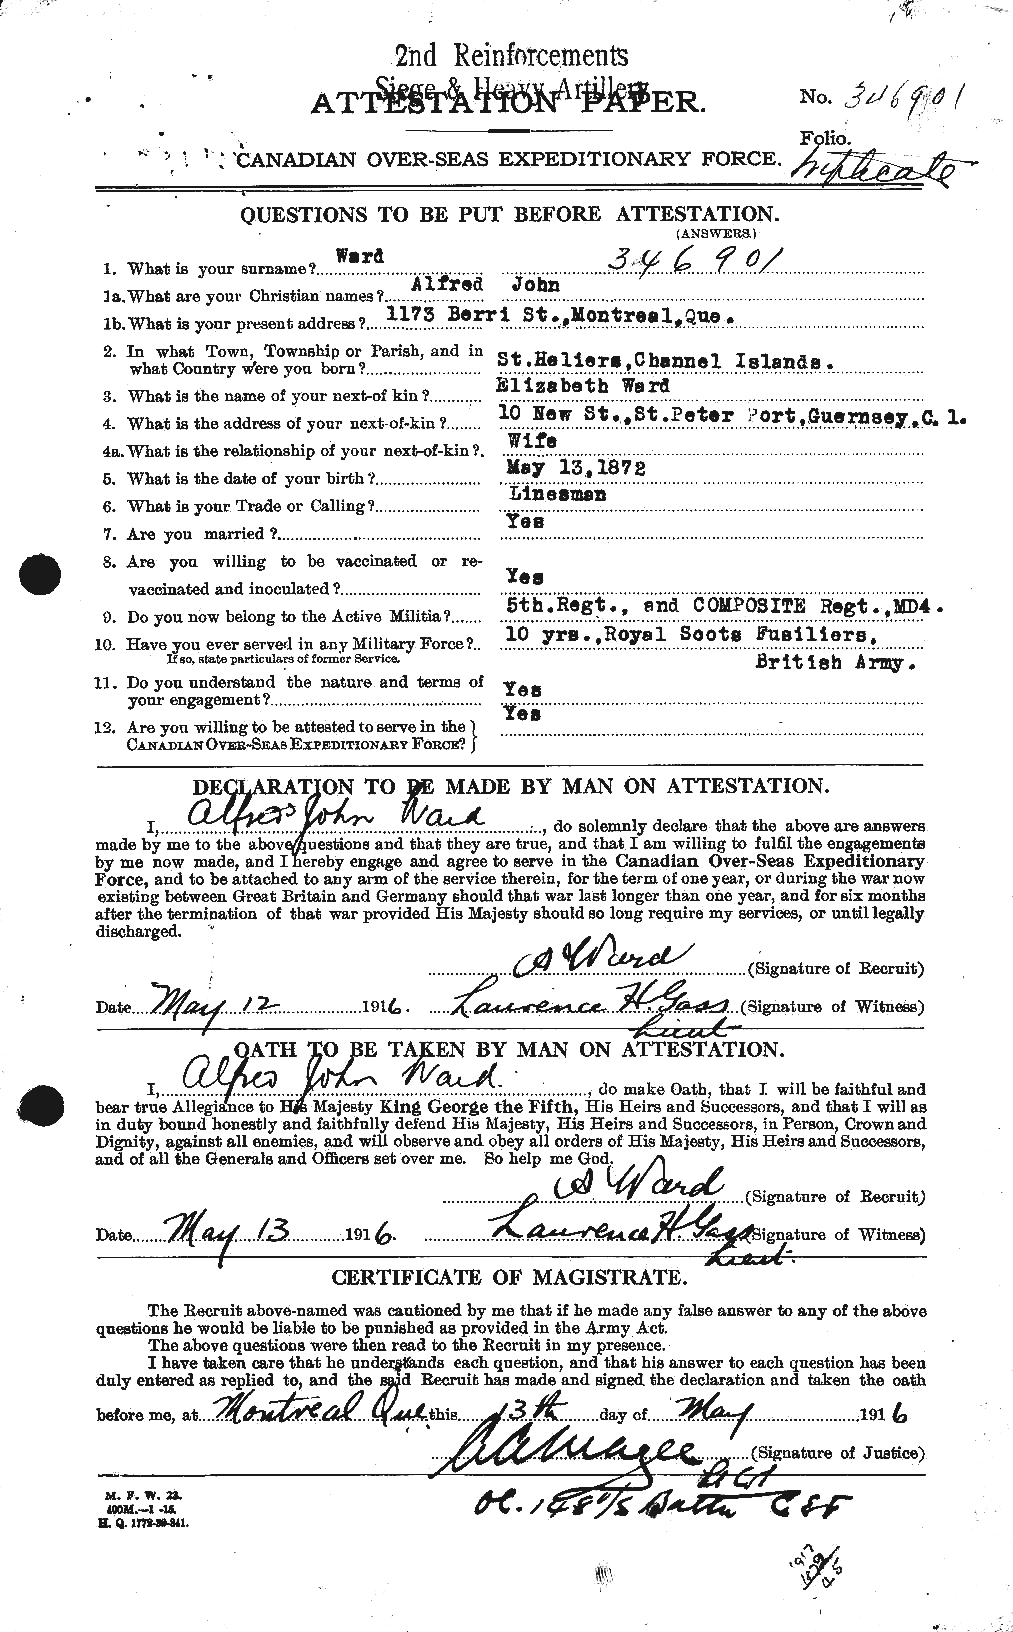 Personnel Records of the First World War - CEF 655127a